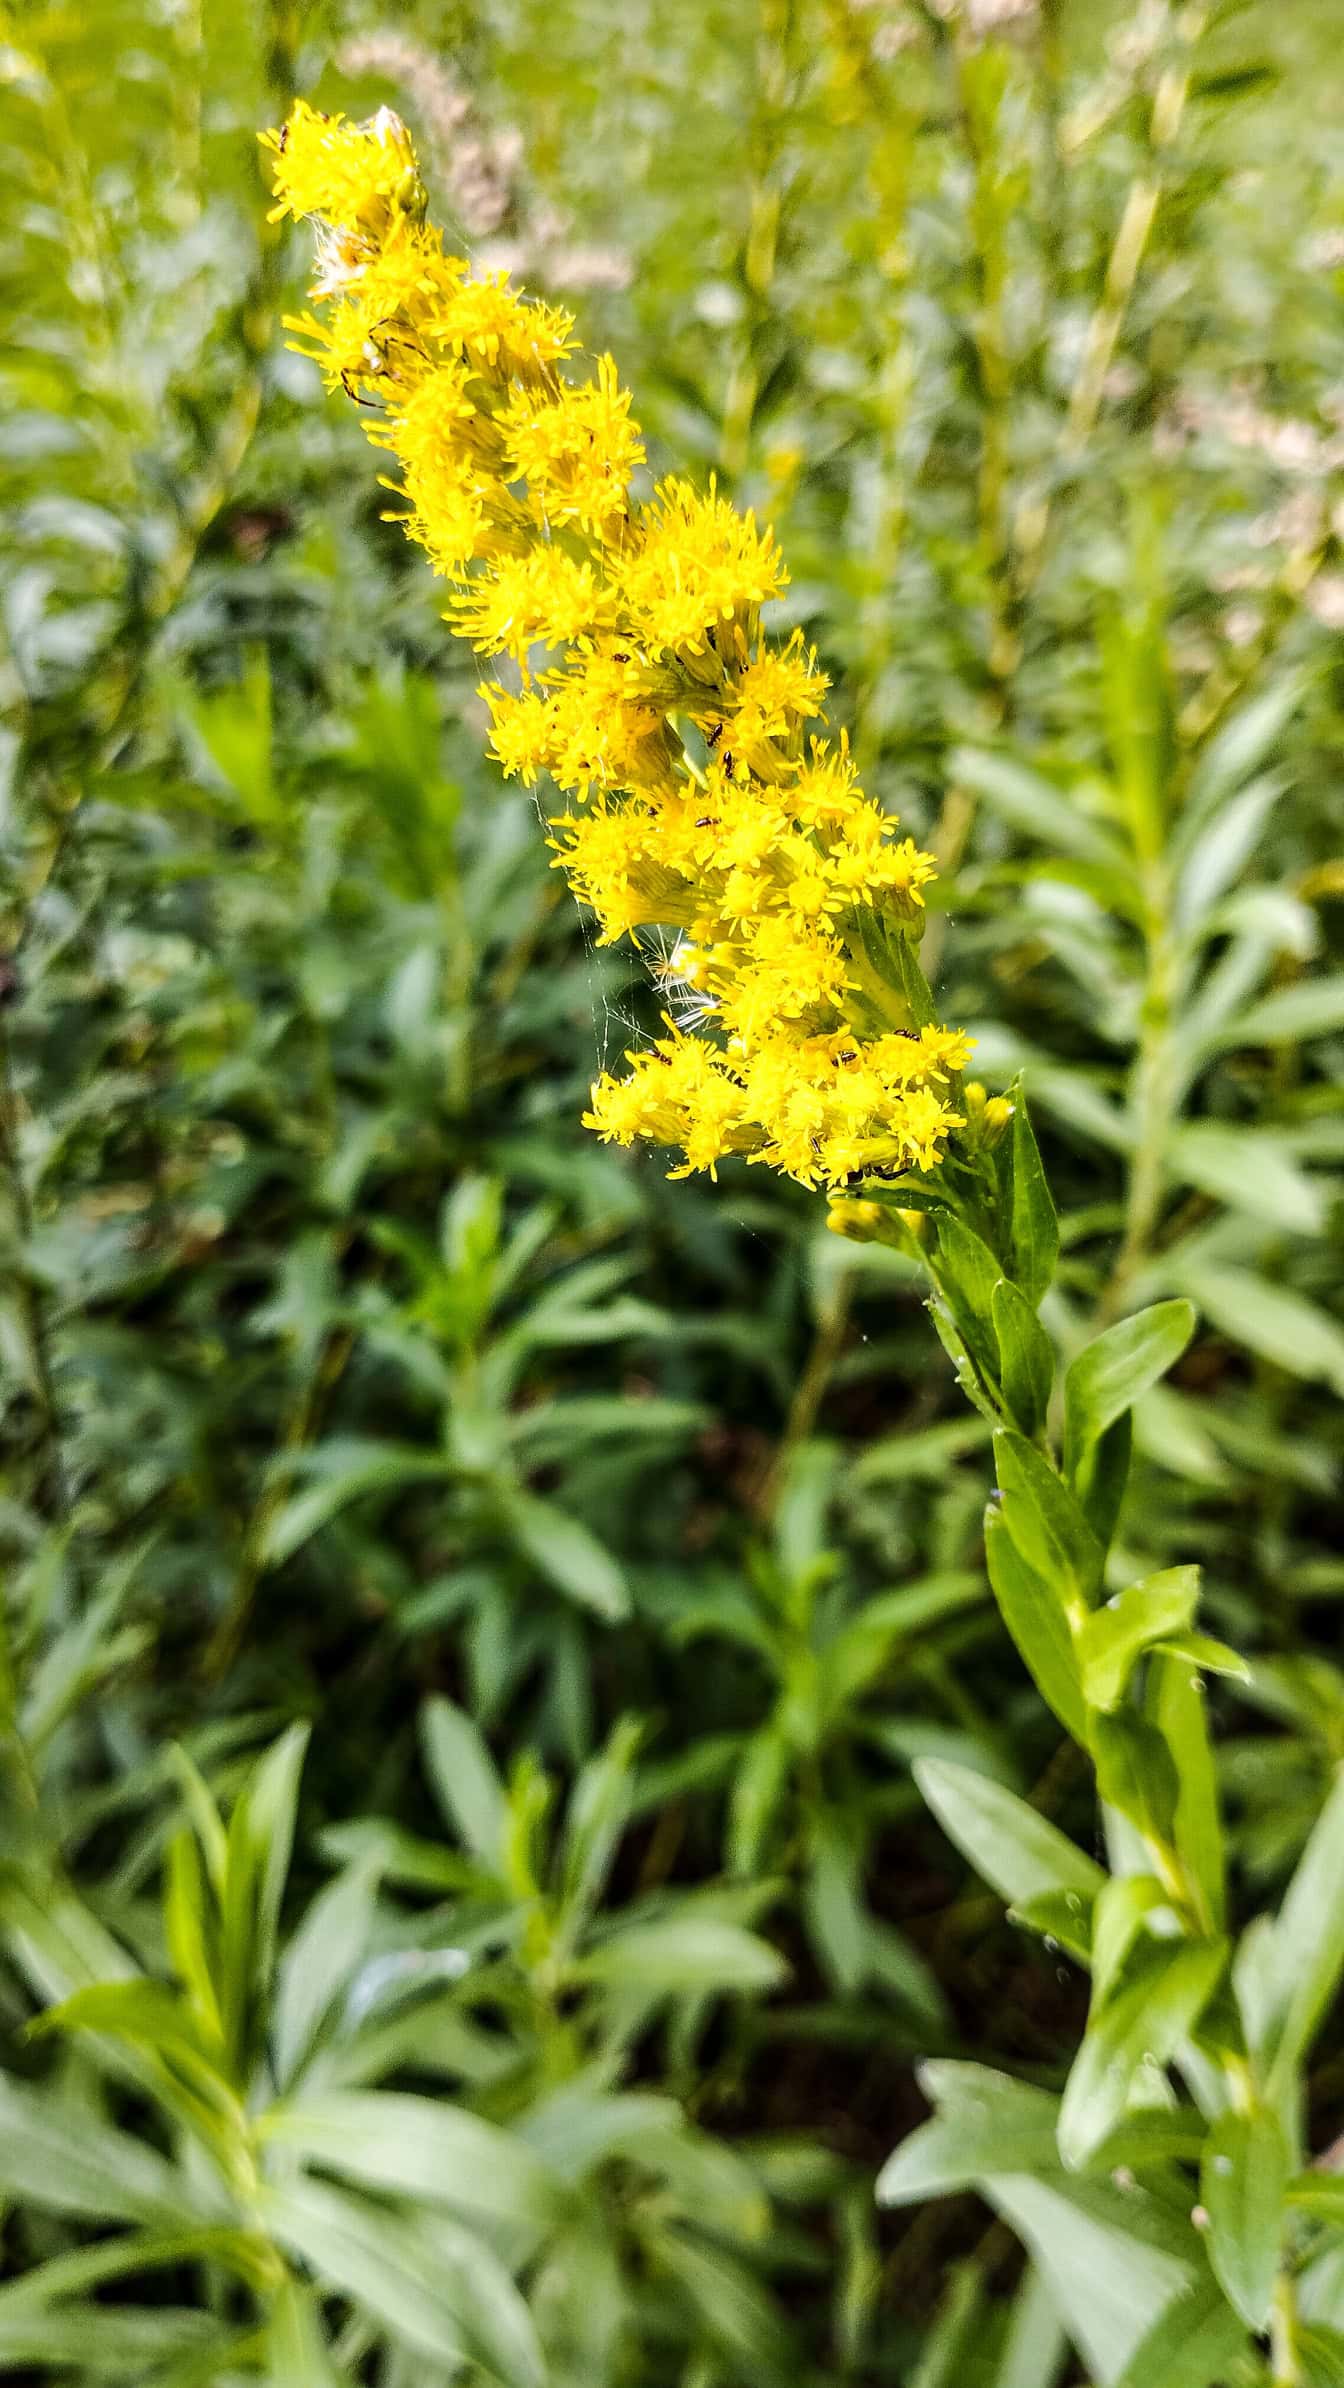 A flower known as the Canadian goldenrod (Solidago canadensis) a yellow flower in full bloom